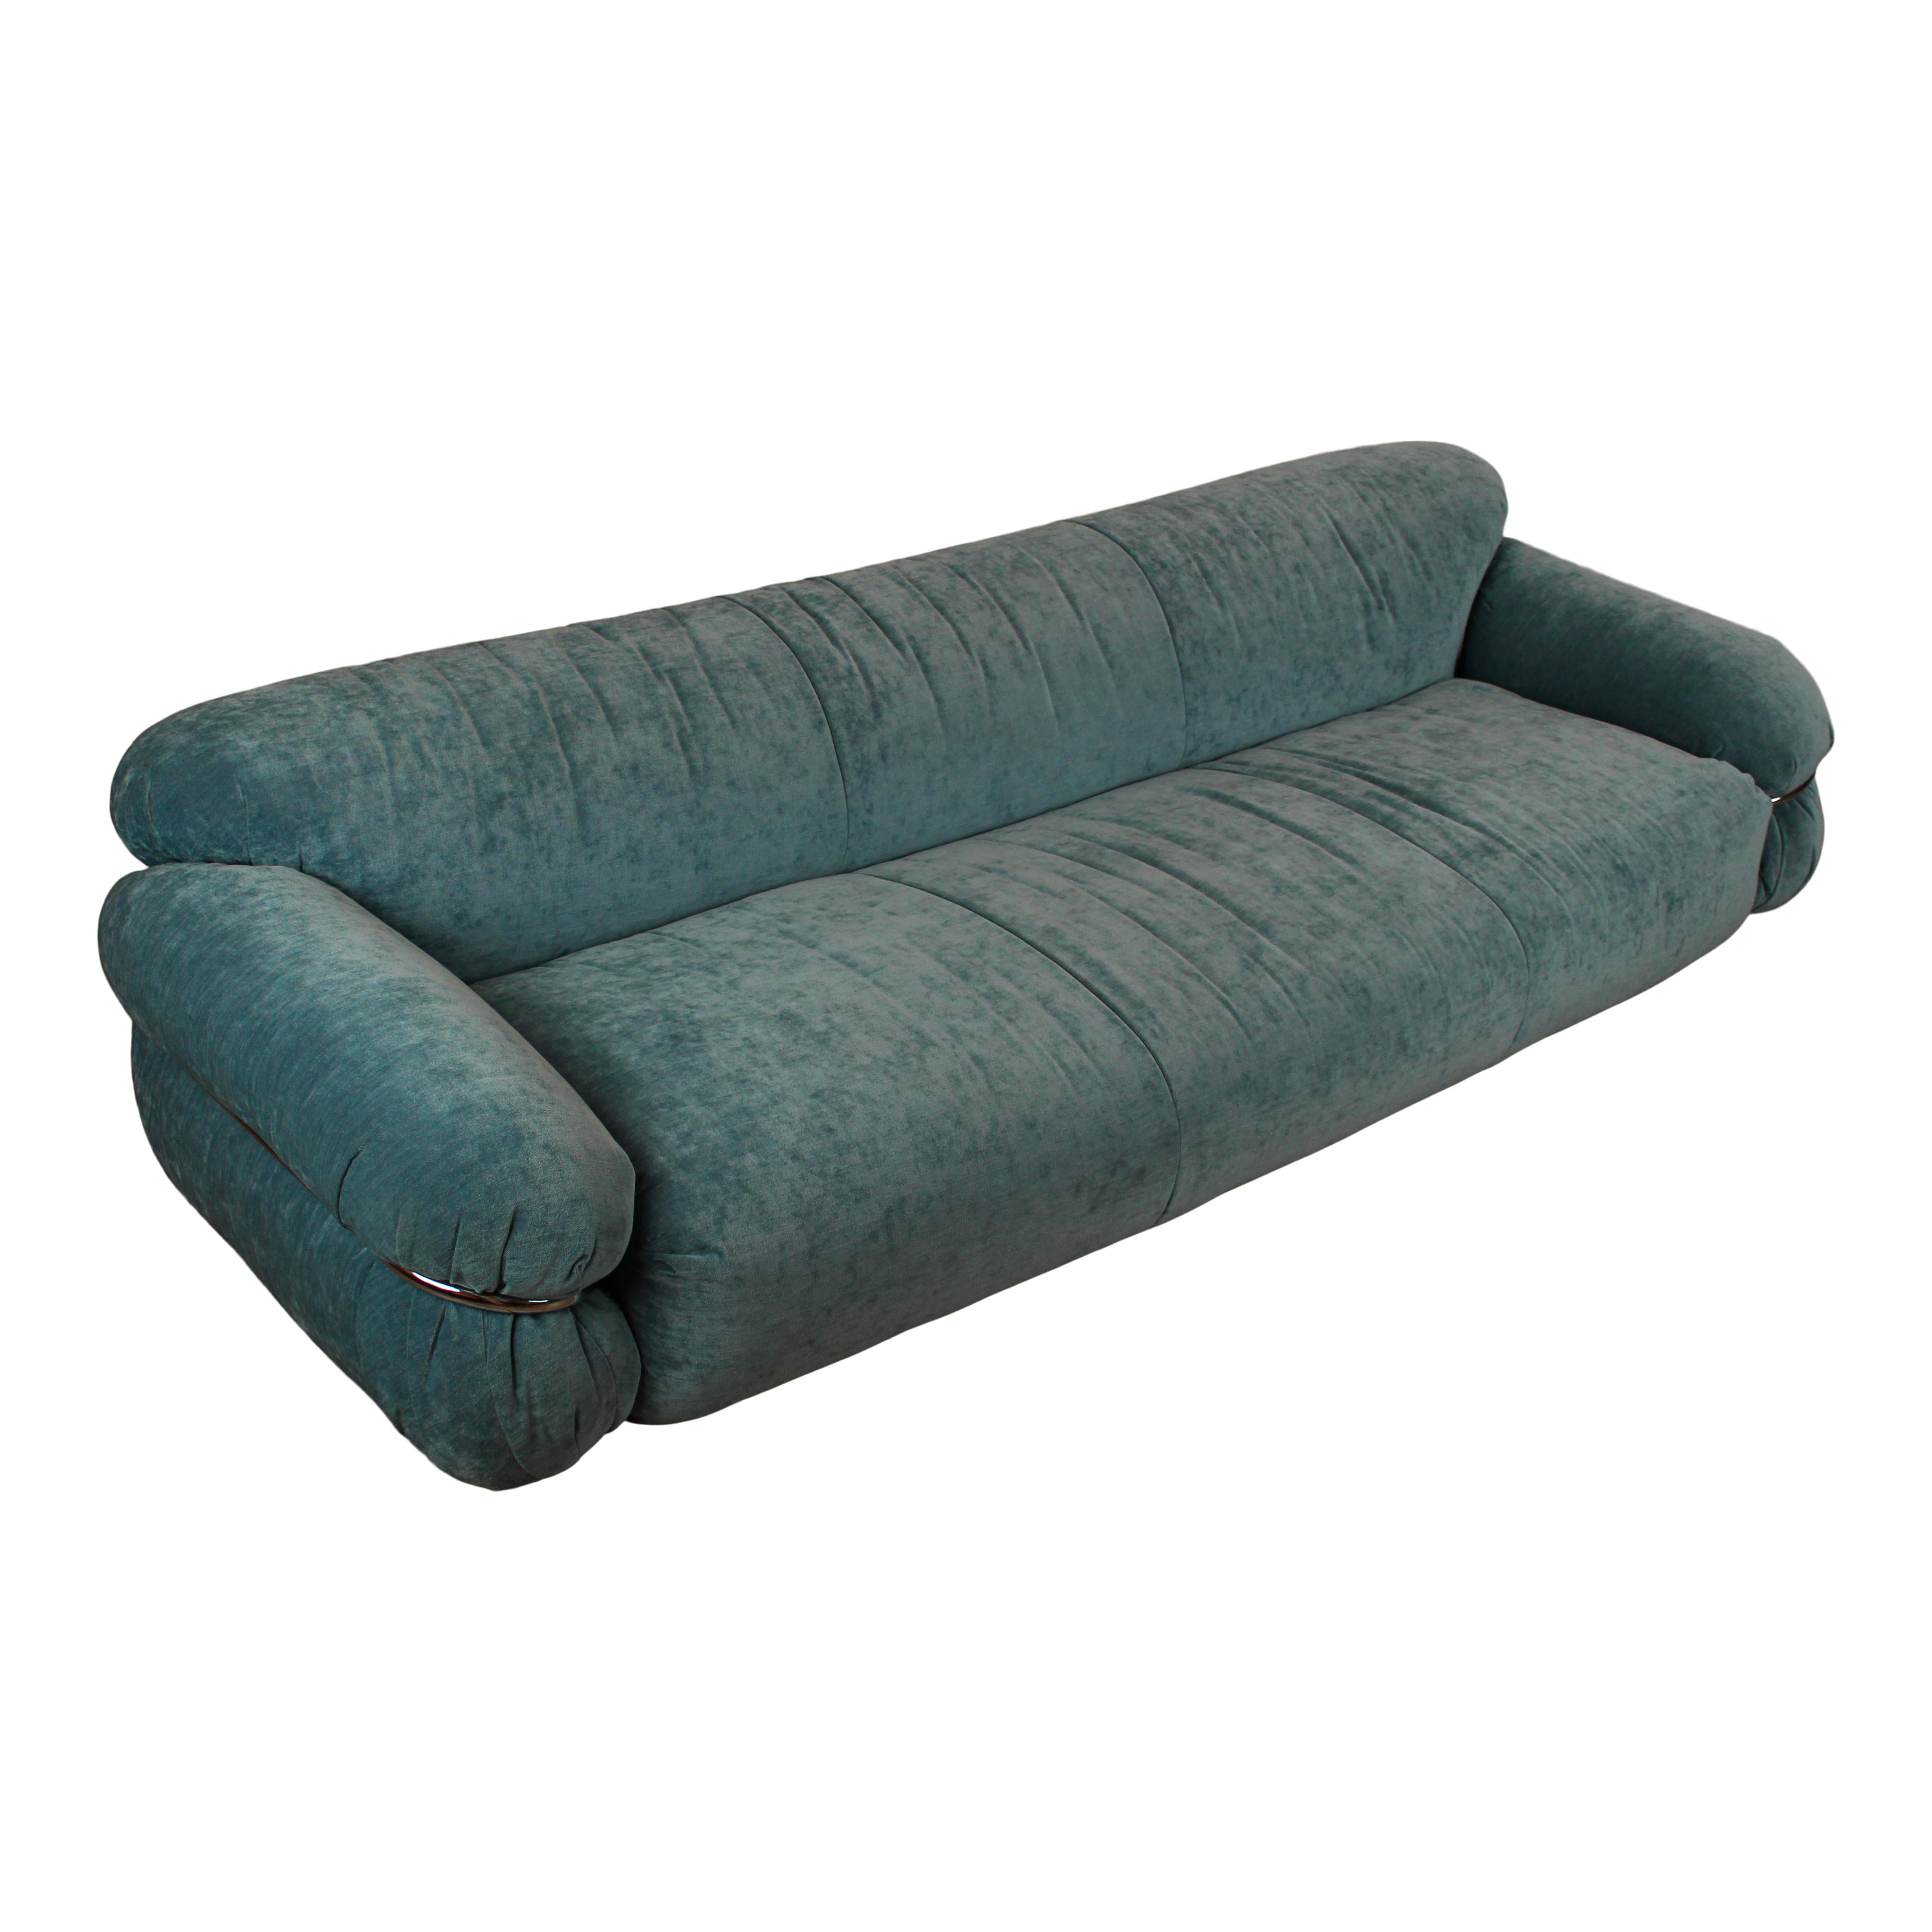 Sesann three-seater sofa, designed by Gianfranco Frattini in 1970 and produced by the Italian manufacturer Cassina.
It features azure velvet upholstery and a chrome tubular cage as structural support.

Fully restored in Italy.

Cassina presented the